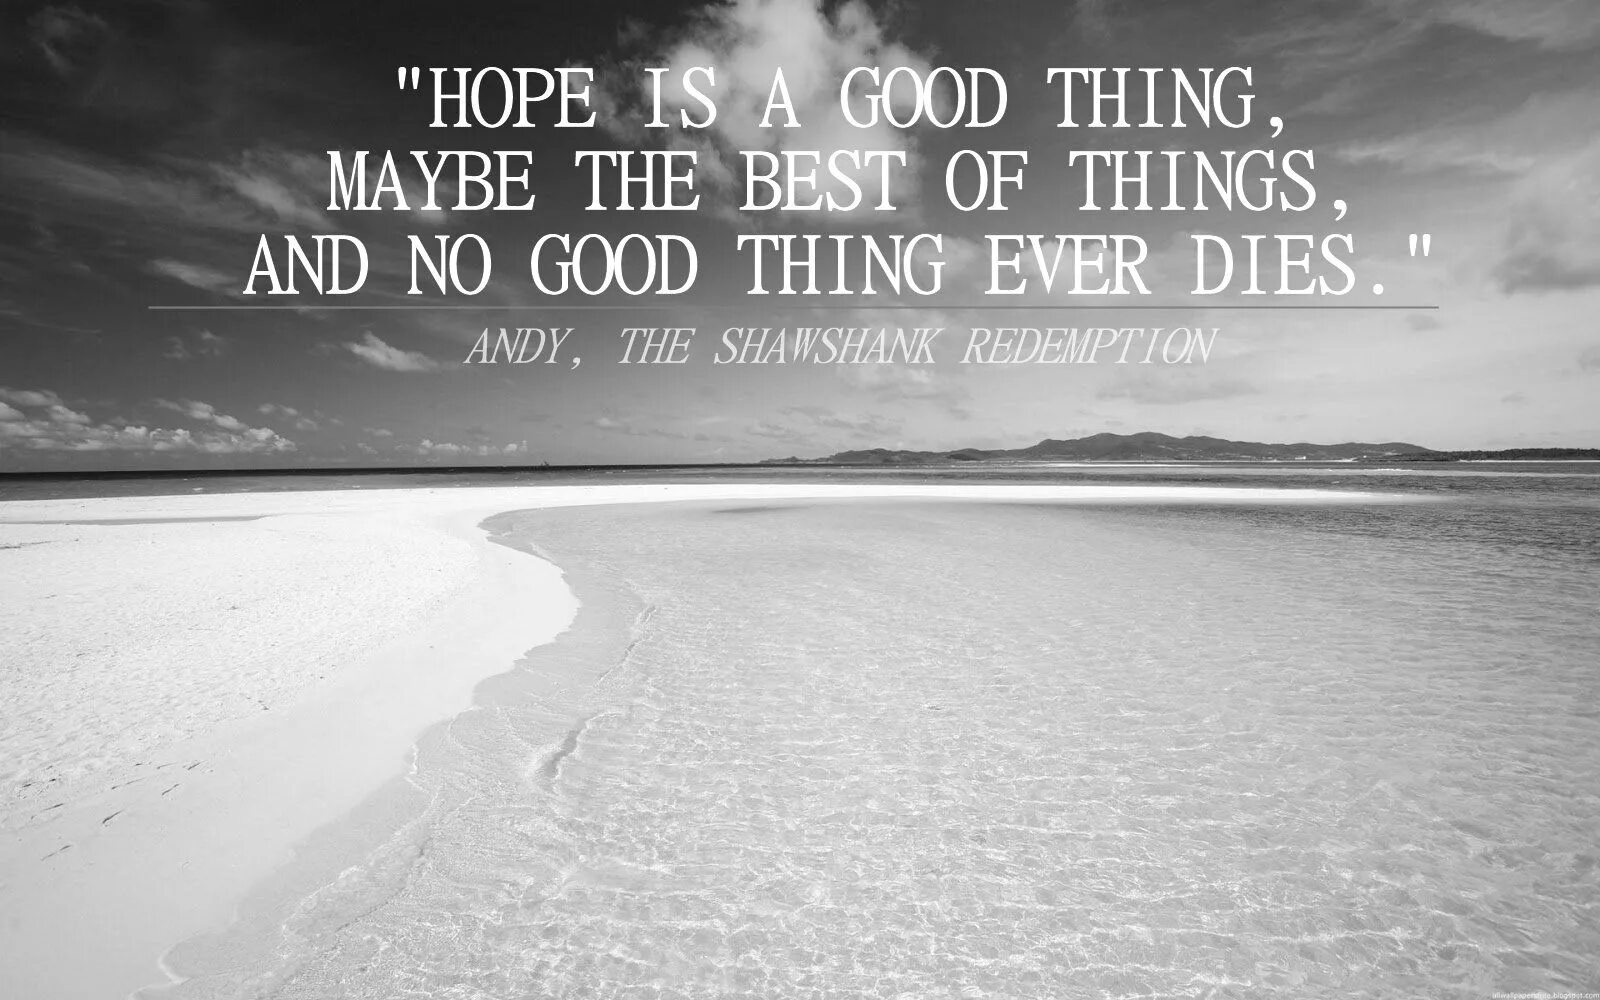 Hope is a good thing maybe the best of things and no good thing ever dies. Remember Red hope is a good thing. Shawshank Redemption. The Shawshank Redemption цитаты.